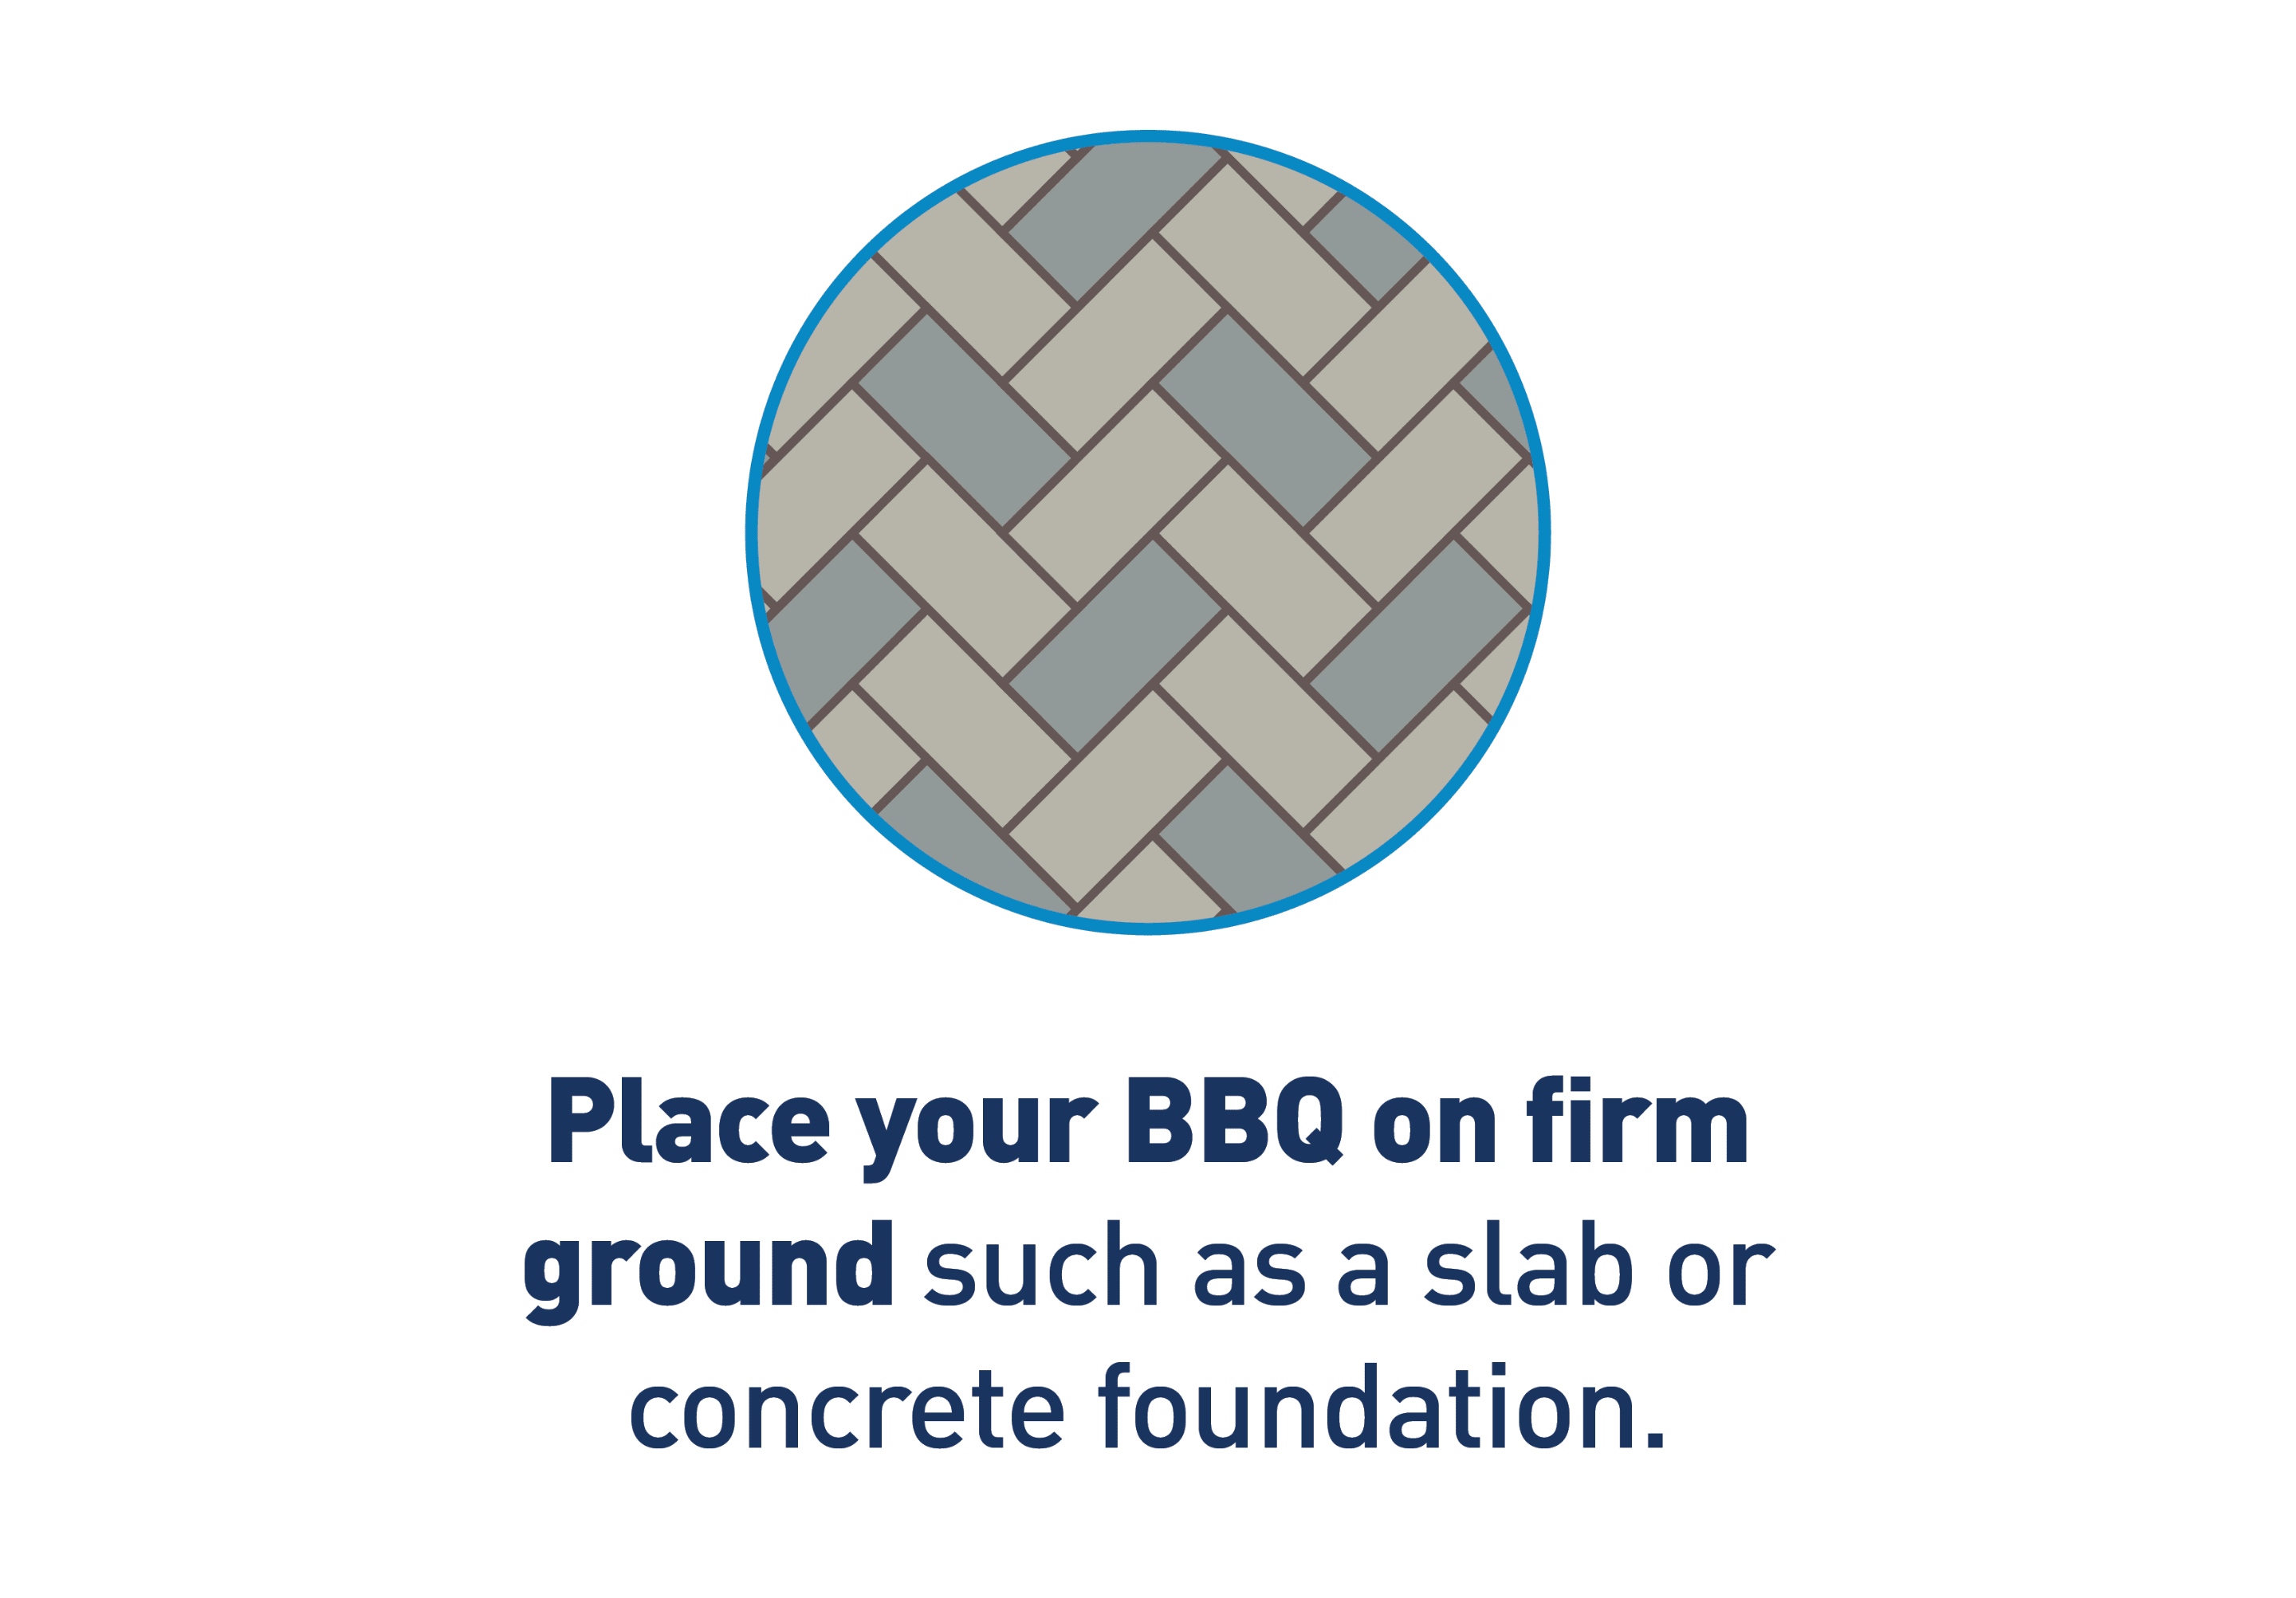 Image Description: Graphic of slab foundation. Text: Place your BBQ on firm ground such as a slab or concrete foundation.